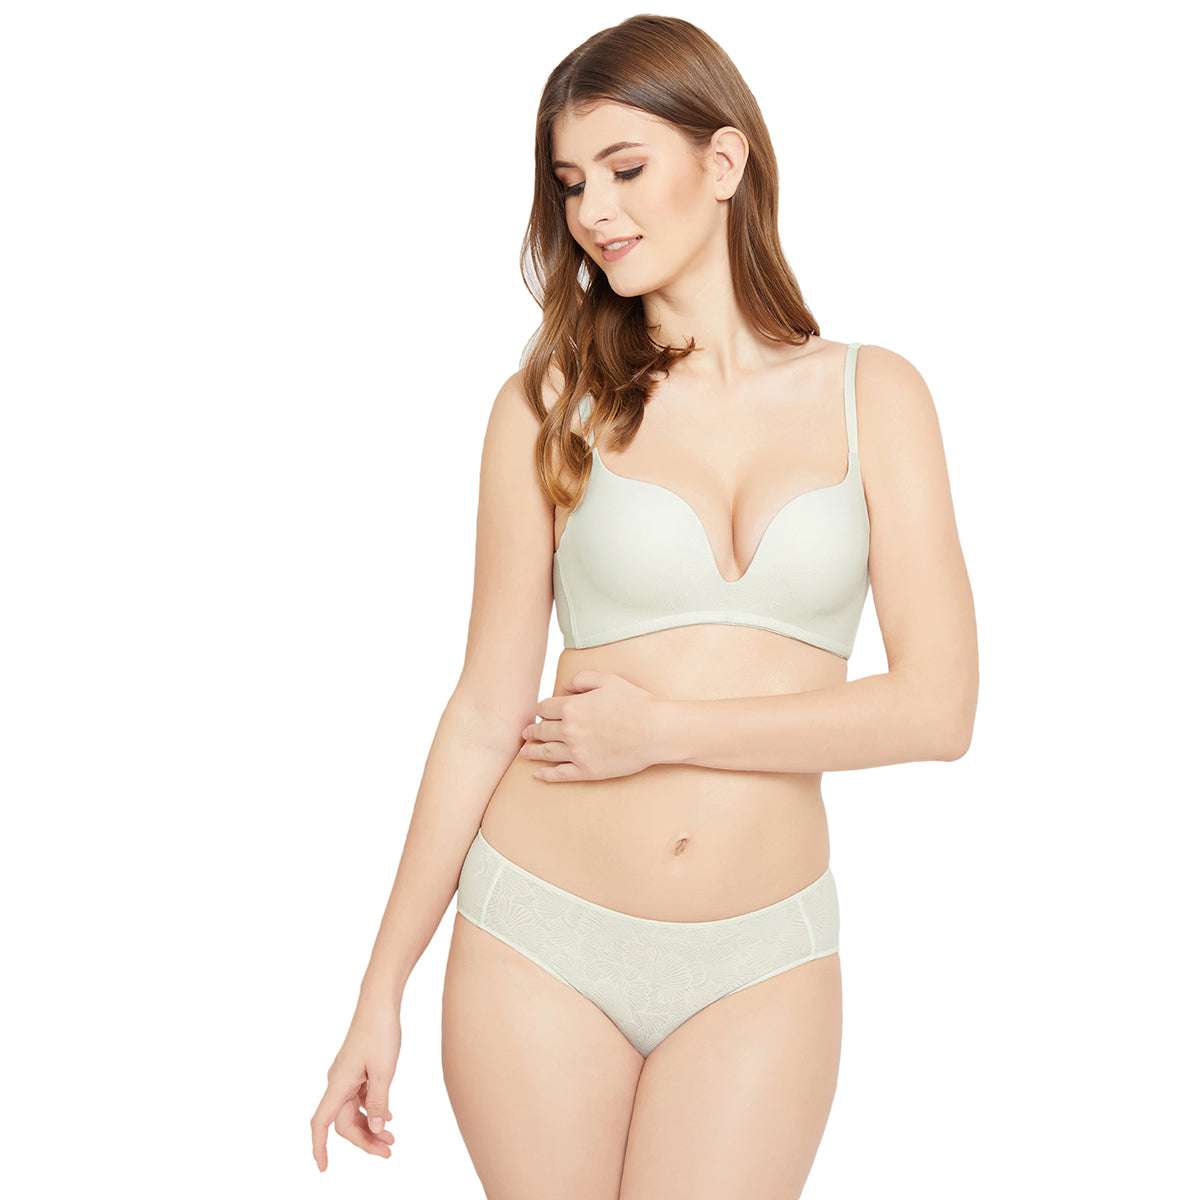 Ecozen Padded Non-wired 3/4th Cup Everyday Wear Push-up Bra - Cream